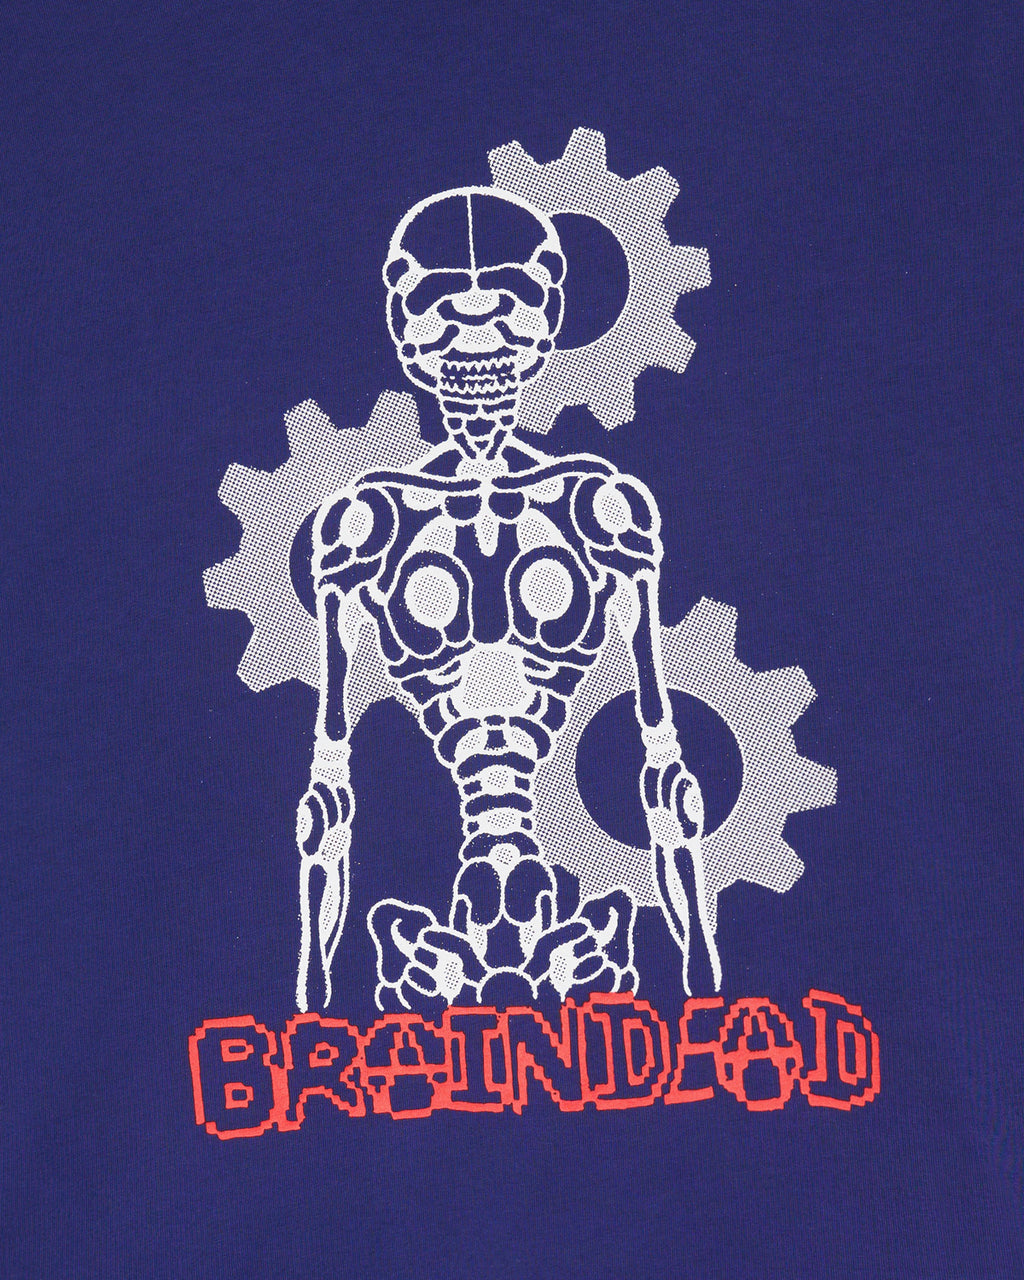 Skeletal Gear L/S Tee, Navy Brain Dead This is the perfect time to